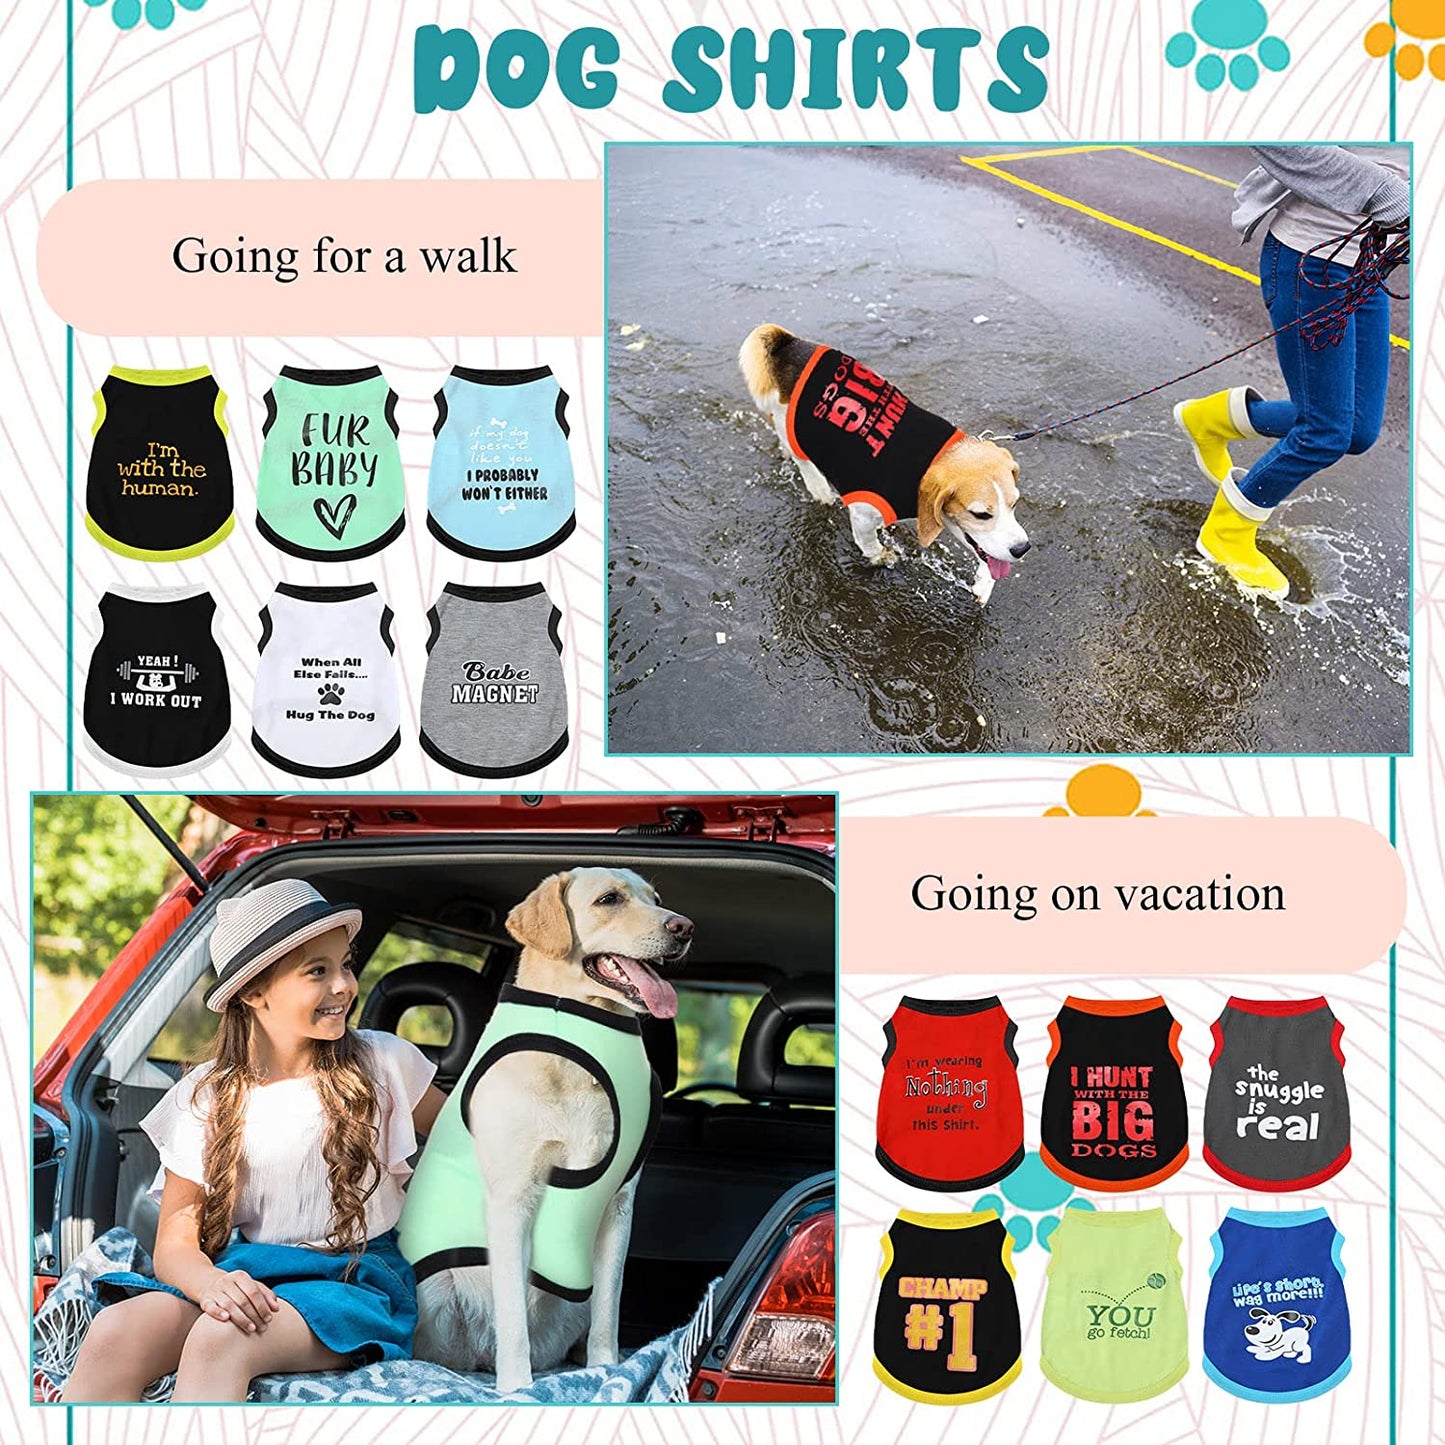 12 Pieces Dog Shirts Pet Printed Clothes with Funny Letters Summer Pet T Shirts Cool Puppy Shirts Breathable Dog Outfit Soft Dog Sweatshirt for Pet Dogs Cats Accessories, 12 Styles (X-Large)